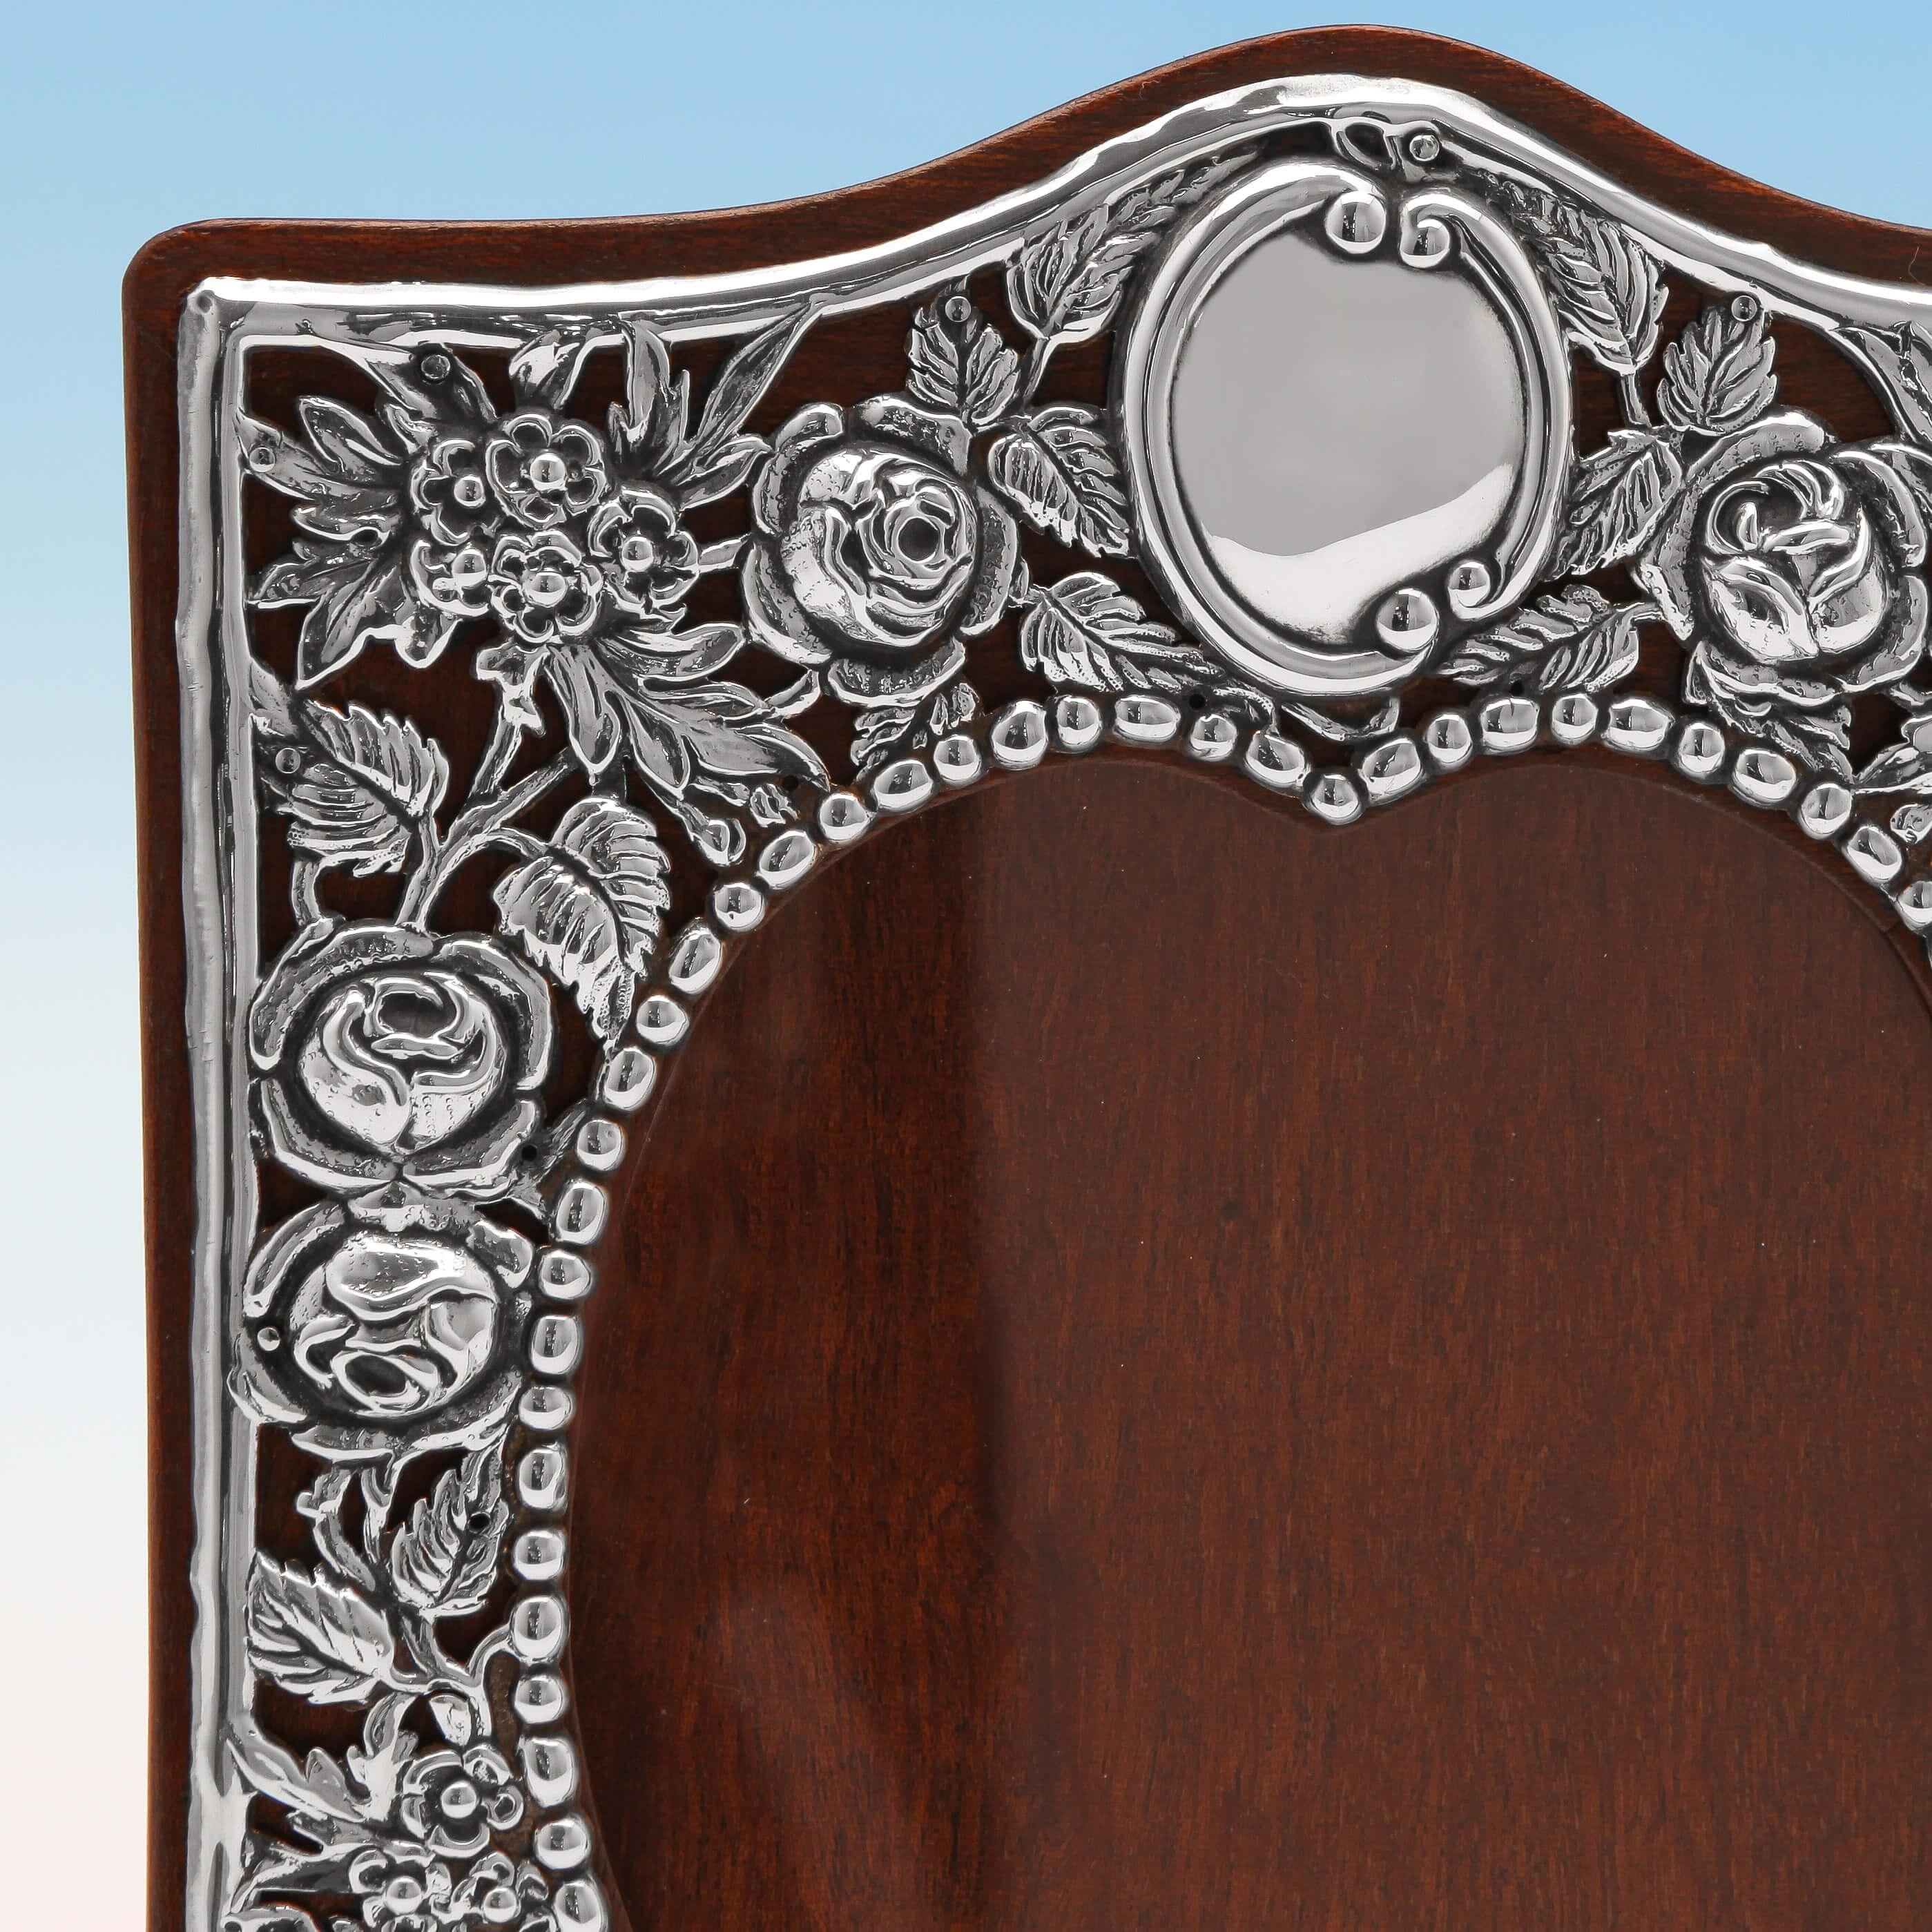 English Heart Shaped Art Nouveau Antique Sterling Silver Photograph Frame from 1902